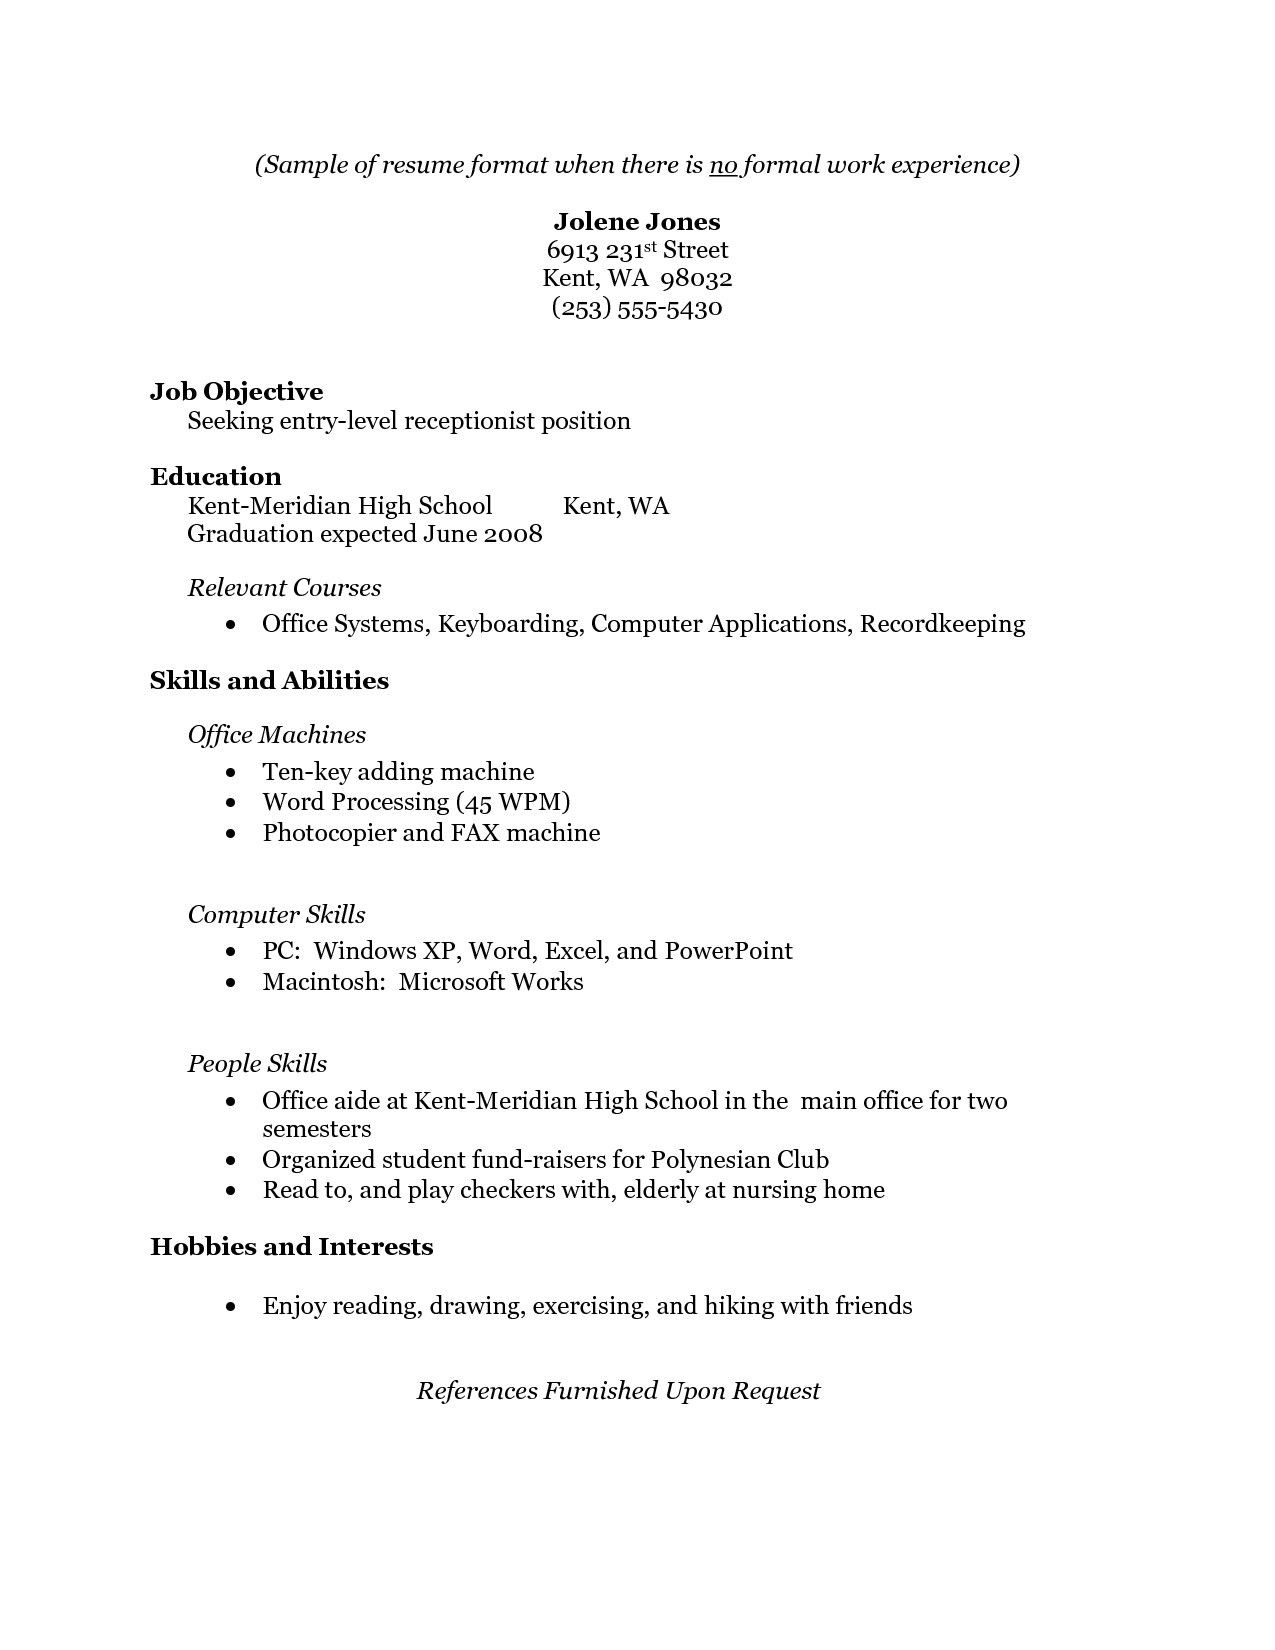 Sample Resume for High School Student with No Job Experience Free Resume Templates No Work Experience #experience …